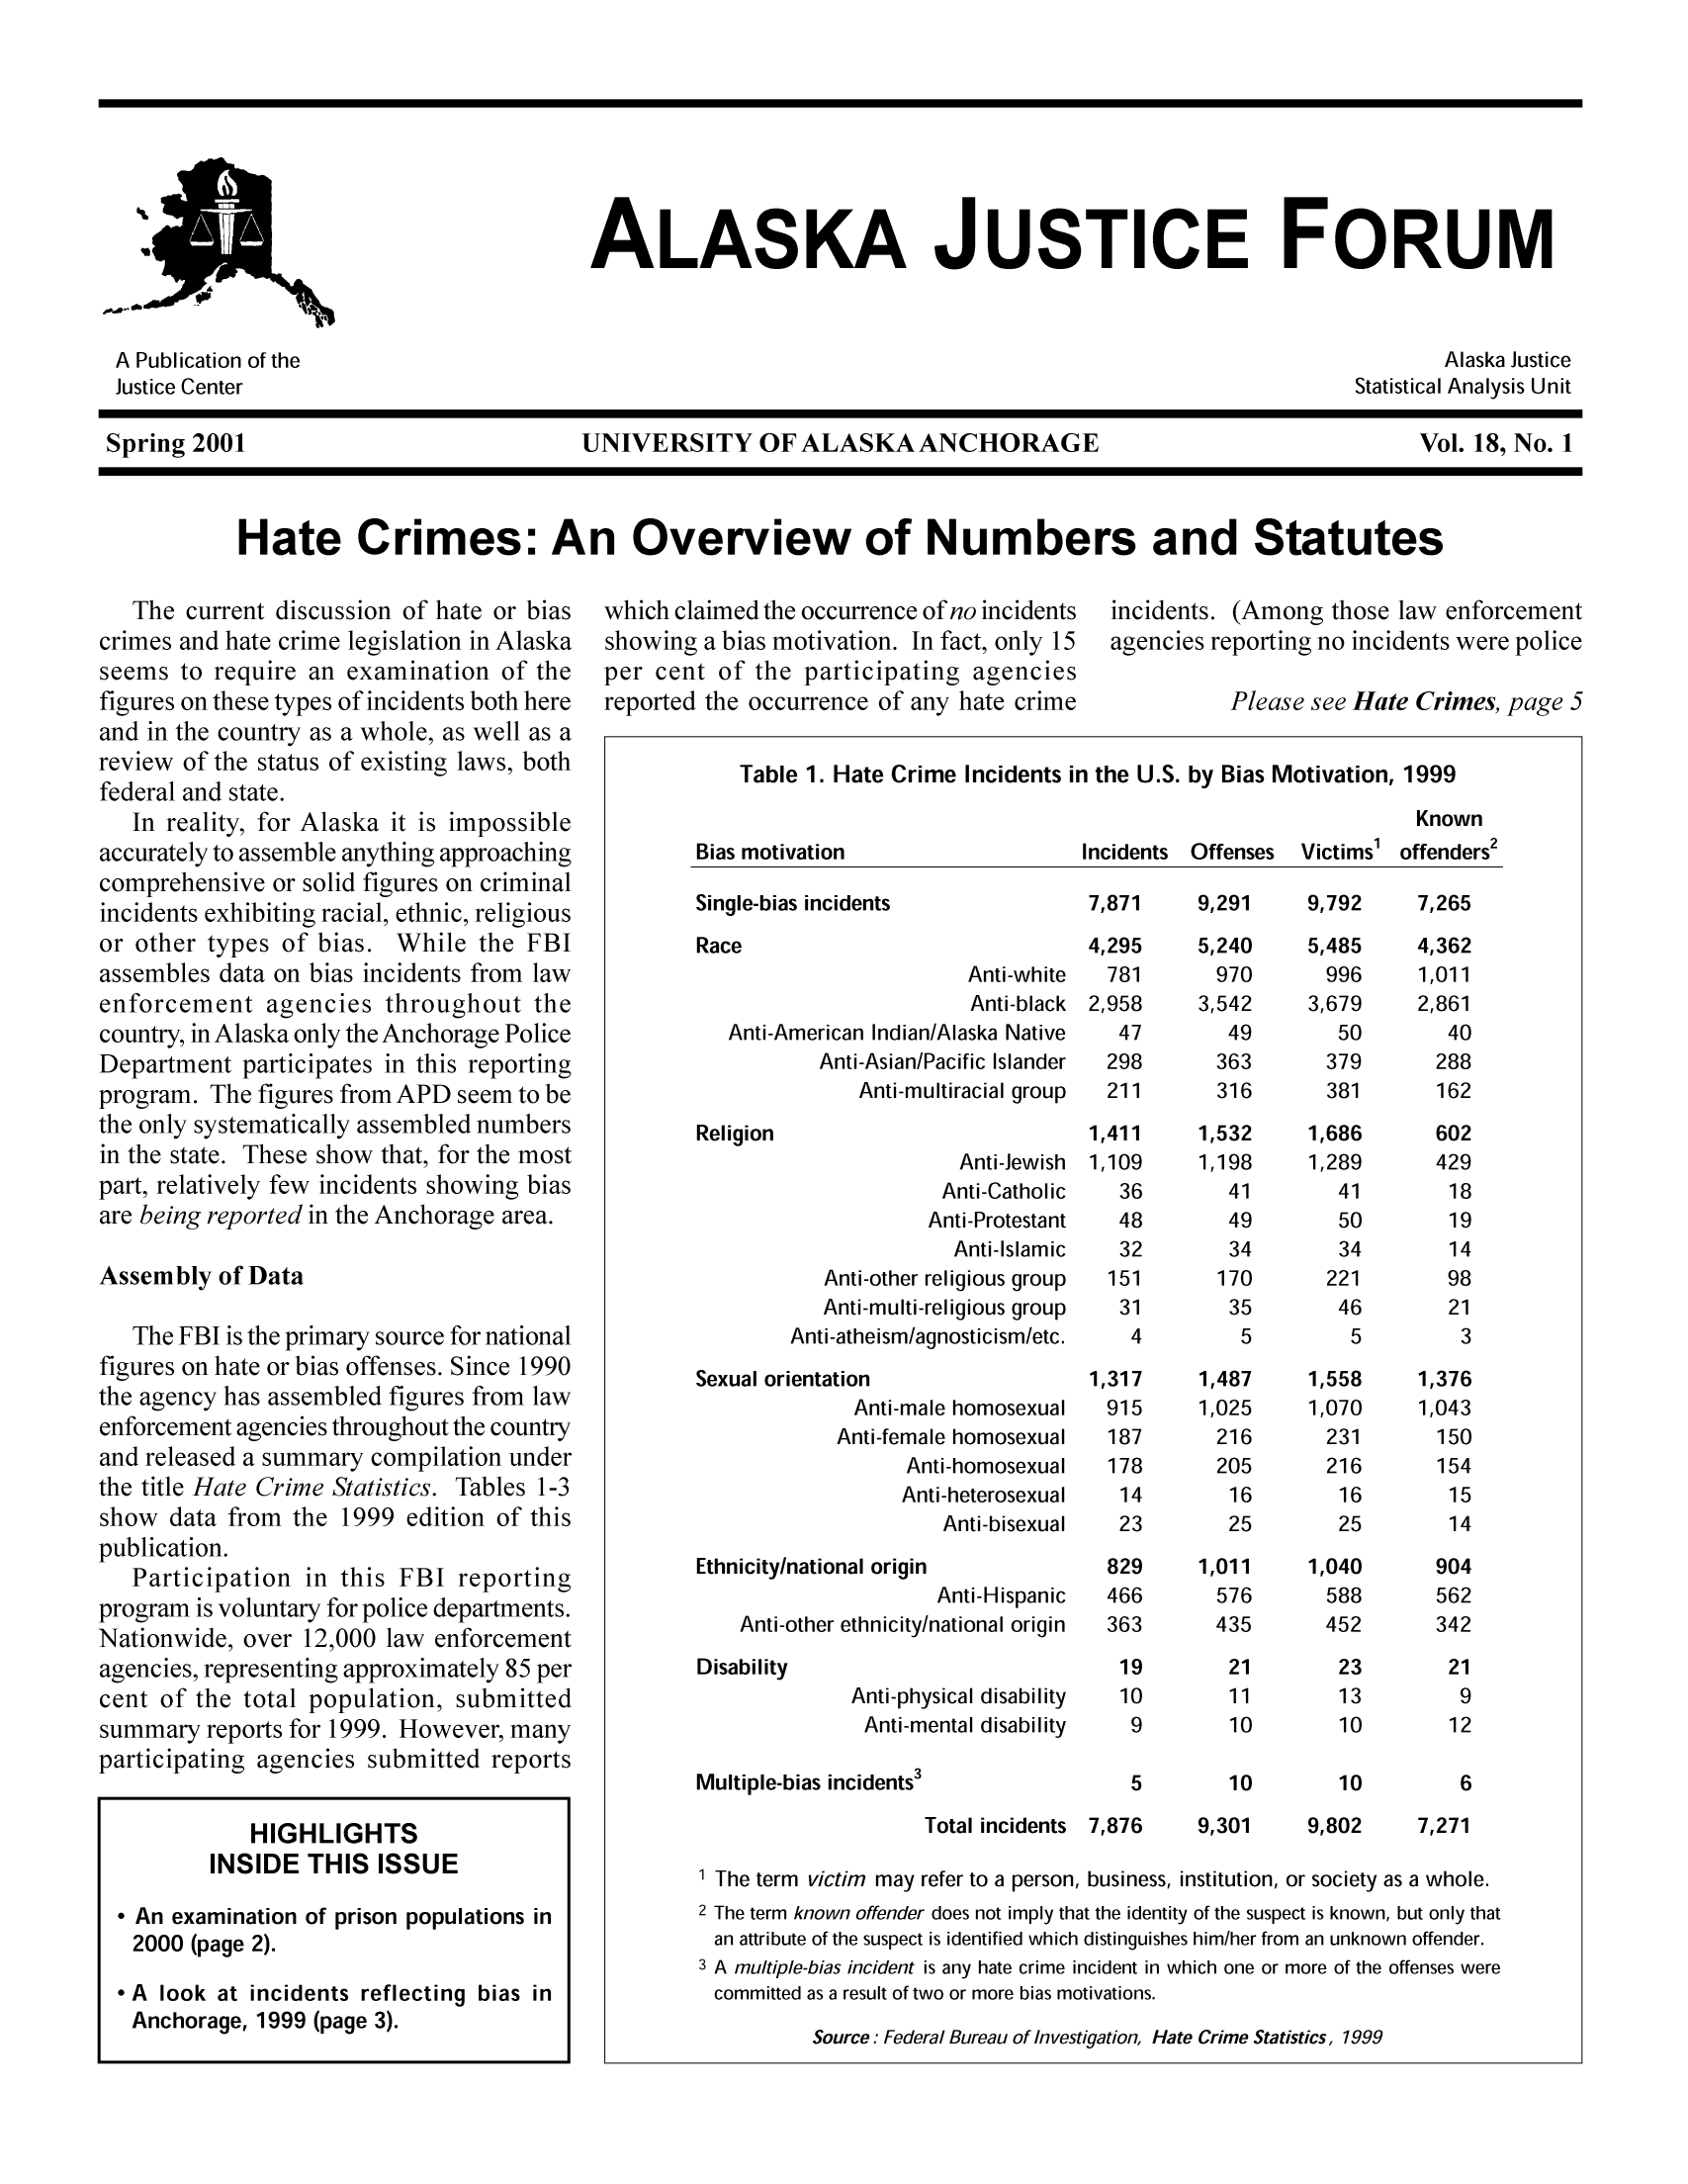 handle is hein.journals/aljufor18 and id is 1 raw text is: ALASKA JUSTICE FORUM
A Publication of the                                                 Alaska Justice
Justice Center                                                   Statistical Analysis Unit
Spring 2001              UNIVERSITY OF ALASKA ANCHORAGE              Vol. 18, No.1
Hate Crimes: An Overview of Numbers and Statutes

The current discussion of hate or bias
crimes and hate crime legislation in Alaska
seems to require an examination of the
figures on these types of incidents both here
and in the country as a whole, as well as a
review of the status of existing laws, both
federal and state.
In reality, for Alaska it is impossible
accurately to assemble anything approaching
comprehensive or solid figures on criminal
incidents exhibiting racial, ethnic, religious
or other types of bias. While the FBI
assembles data on bias incidents from law
enforcement agencies throughout the
country, in Alaska only the Anchorage Police
Department participates in this reporting
program. The figures from APD seem to be
the only systematically assembled numbers
in the state. These show that, for the most
part, relatively few incidents showing bias
are being reported in the Anchorage area.
Assembly of Data
The FBI is the primary source for national
figures on hate or bias offenses. Since 1990
the agency has assembled figures from law
enforcement agencies throughout the country
and released a summary compilation under
the title Hate Crime Statistics. Tables 1-3
show data from the 1999 edition of this
publication.
Participation in this FBI reporting
program is voluntary for police departments.
Nationwide, over 12,000 law enforcement
agencies, representing approximately 85 per
cent of the total population, submitted
summary reports for 1999. However, many
participating agencies submitted reports
HIGHLIGHTS
INSIDE THIS ISSUE
 An examination of prison populations in
2000 (page 2).
 A look at incidents reflecting bias in
Anchorage, 1999 (page 3).

which claimed the occurrence of no incidents
showing a bias motivation. In fact, only 15
per cent of the participating agencies
reported the occurrence of any hate crime

incidents. (Among those law enforcement
agencies reporting no incidents were police
Please see Hate Crimes, page 5

Table 1. Hate Crime Incidents in the U.S. by Bias Motivation, 1999
Known

Bias motivation
Single-bias incidents
Race
Anti-white
Anti-black
Anti-American Indian/Alaska Native
Anti-Asian/Pacific Islander
Anti-multiracial group
Religion
Anti-Jewish
Anti-Catholic
Anti-Protestant
Anti-Islamic
Anti-other religious group
Anti-multi-religious group
Anti-atheism/agnosticism/etc.

Sexual orientation
Anti-male homosexual
Anti-female homosexual
Anti-homosexual
Anti-heterosexual
Anti-bisexual
Ethnicity/national origin
Anti-Hispanic
Anti-other ethnicity/national origin
Disability

Anti-physical disability
Anti-mental disability

Multiple-bias incidents3
Total incidents 7,81

Incidents Offenses

Victims' offenders2

7,871    9,291    9,792    7,265

4,295
781
2,958
47
298
211
1,411
1,109
36
48
32
151
31
4

1,317
915
187
178
14
23

5,240
970
3,542
49
363
316
1,532
1,198
41
49
34
170
35
5
1,487
1,025
216
205
16
25

829     1,011
466       576
363      435

19
10
9

21
11
10

5,485
996
3,679
50
379
381
1,686
1,289
41
50
34
221
46
5
1,558
1,070
231
216
16
25
1,040
588
452
23
13
10

4,362
1,011
2,861
40
288
162
602
429
18
19
14
98
21
3
1,376
1,043
150
154
15
14
904
562
342
21
9
12

5       10        10        6
76     9,301    9,802    7,271

1 The term victim may refer to a person, business, institution, or society as a whole.
2 The term known offender does not imply that the identity of the suspect is known, but only that
an attribute of the suspect is identified which distinguishes him/her from an unknown offender.
3 A multiple-bias incident is any hate crime incident in which one or more of the offenses were
committed as a result of two or more bias motivations.
Source: Federal Bureau of Investigation, Hate Crime Statistics, 1999


